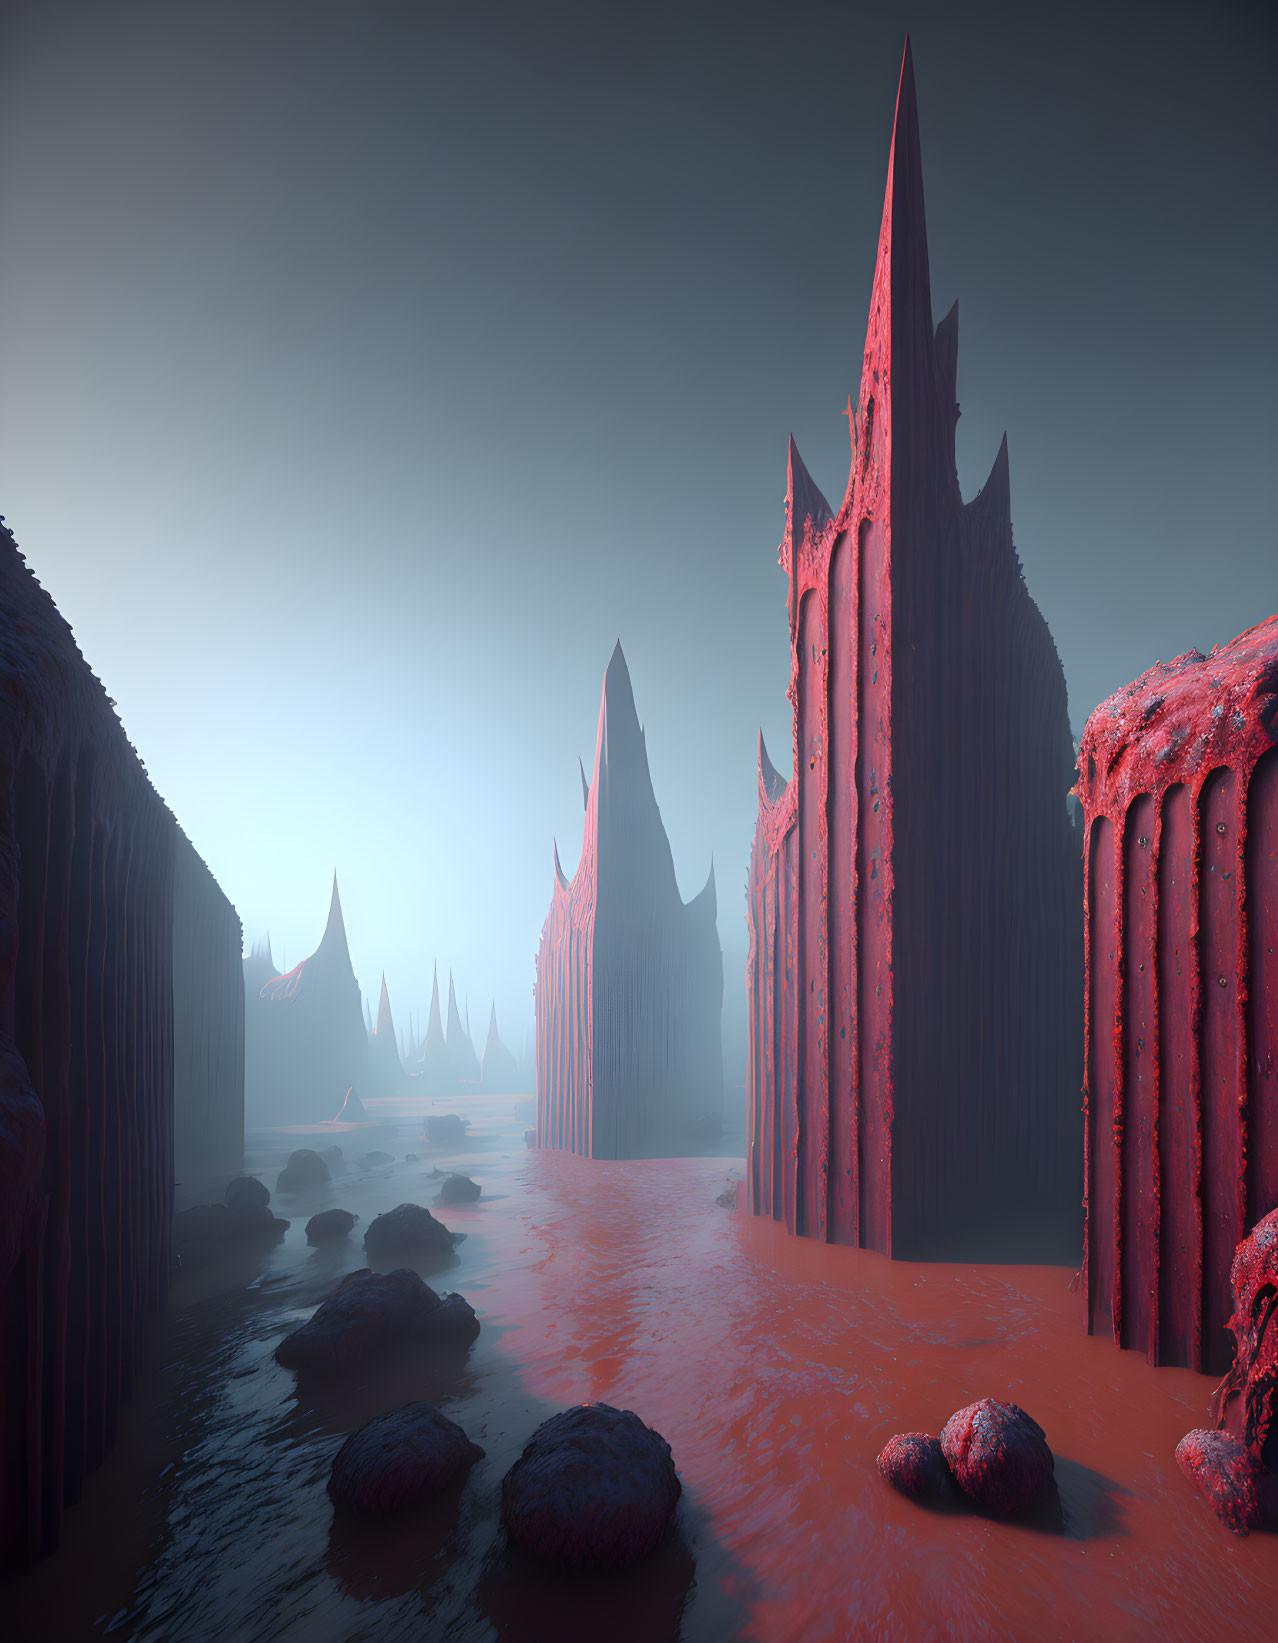 Alien landscape with towering red spires in shallow red sea